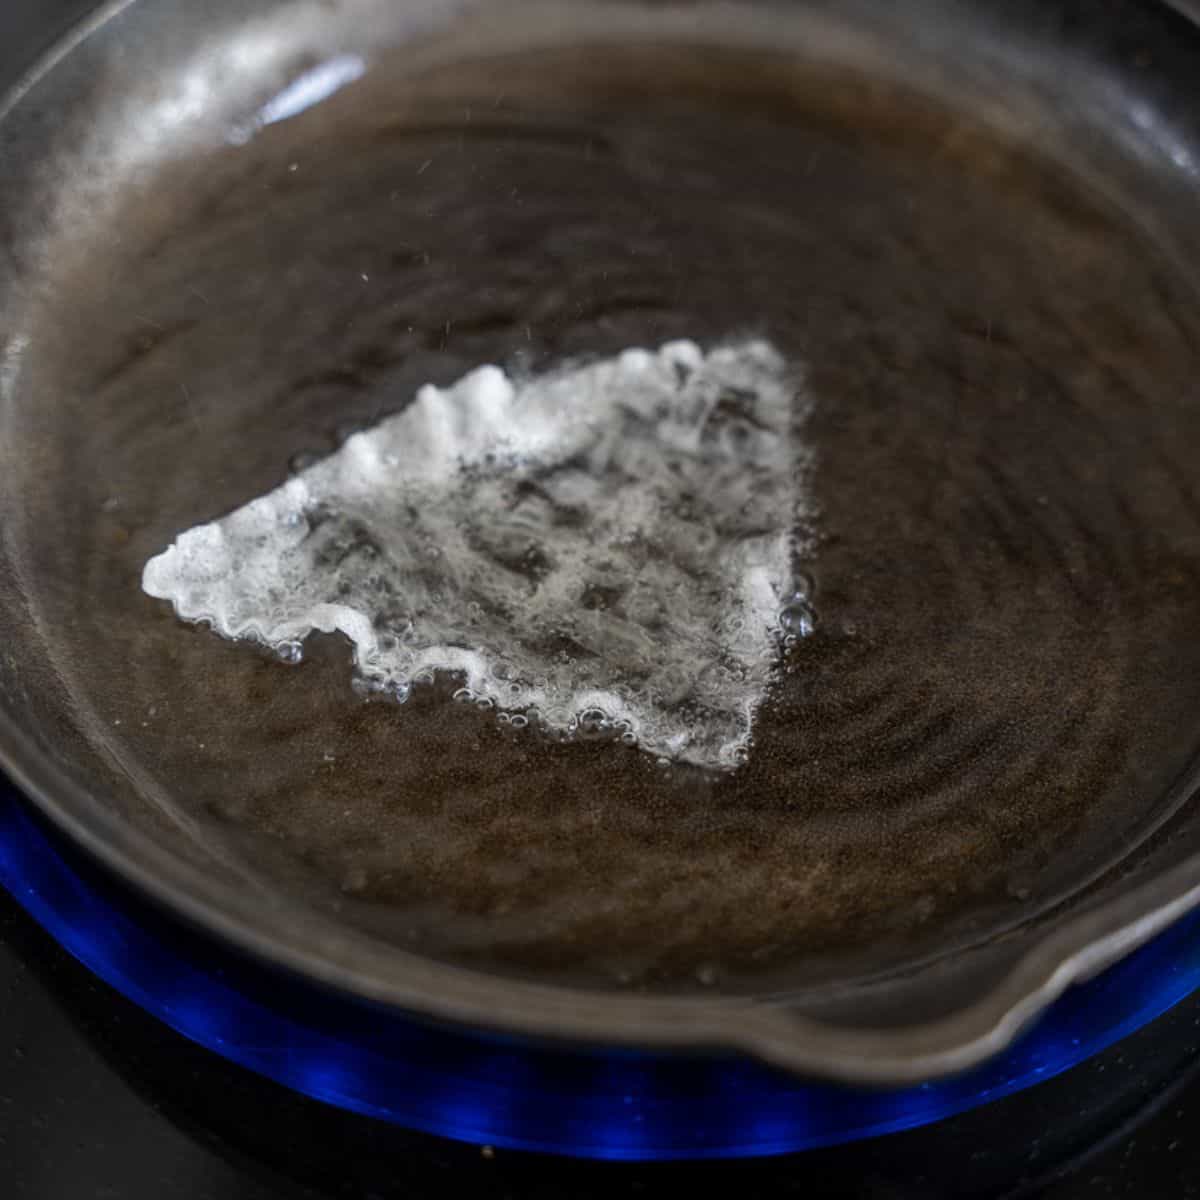 A piece of rice paper in a skillet with hot oil.